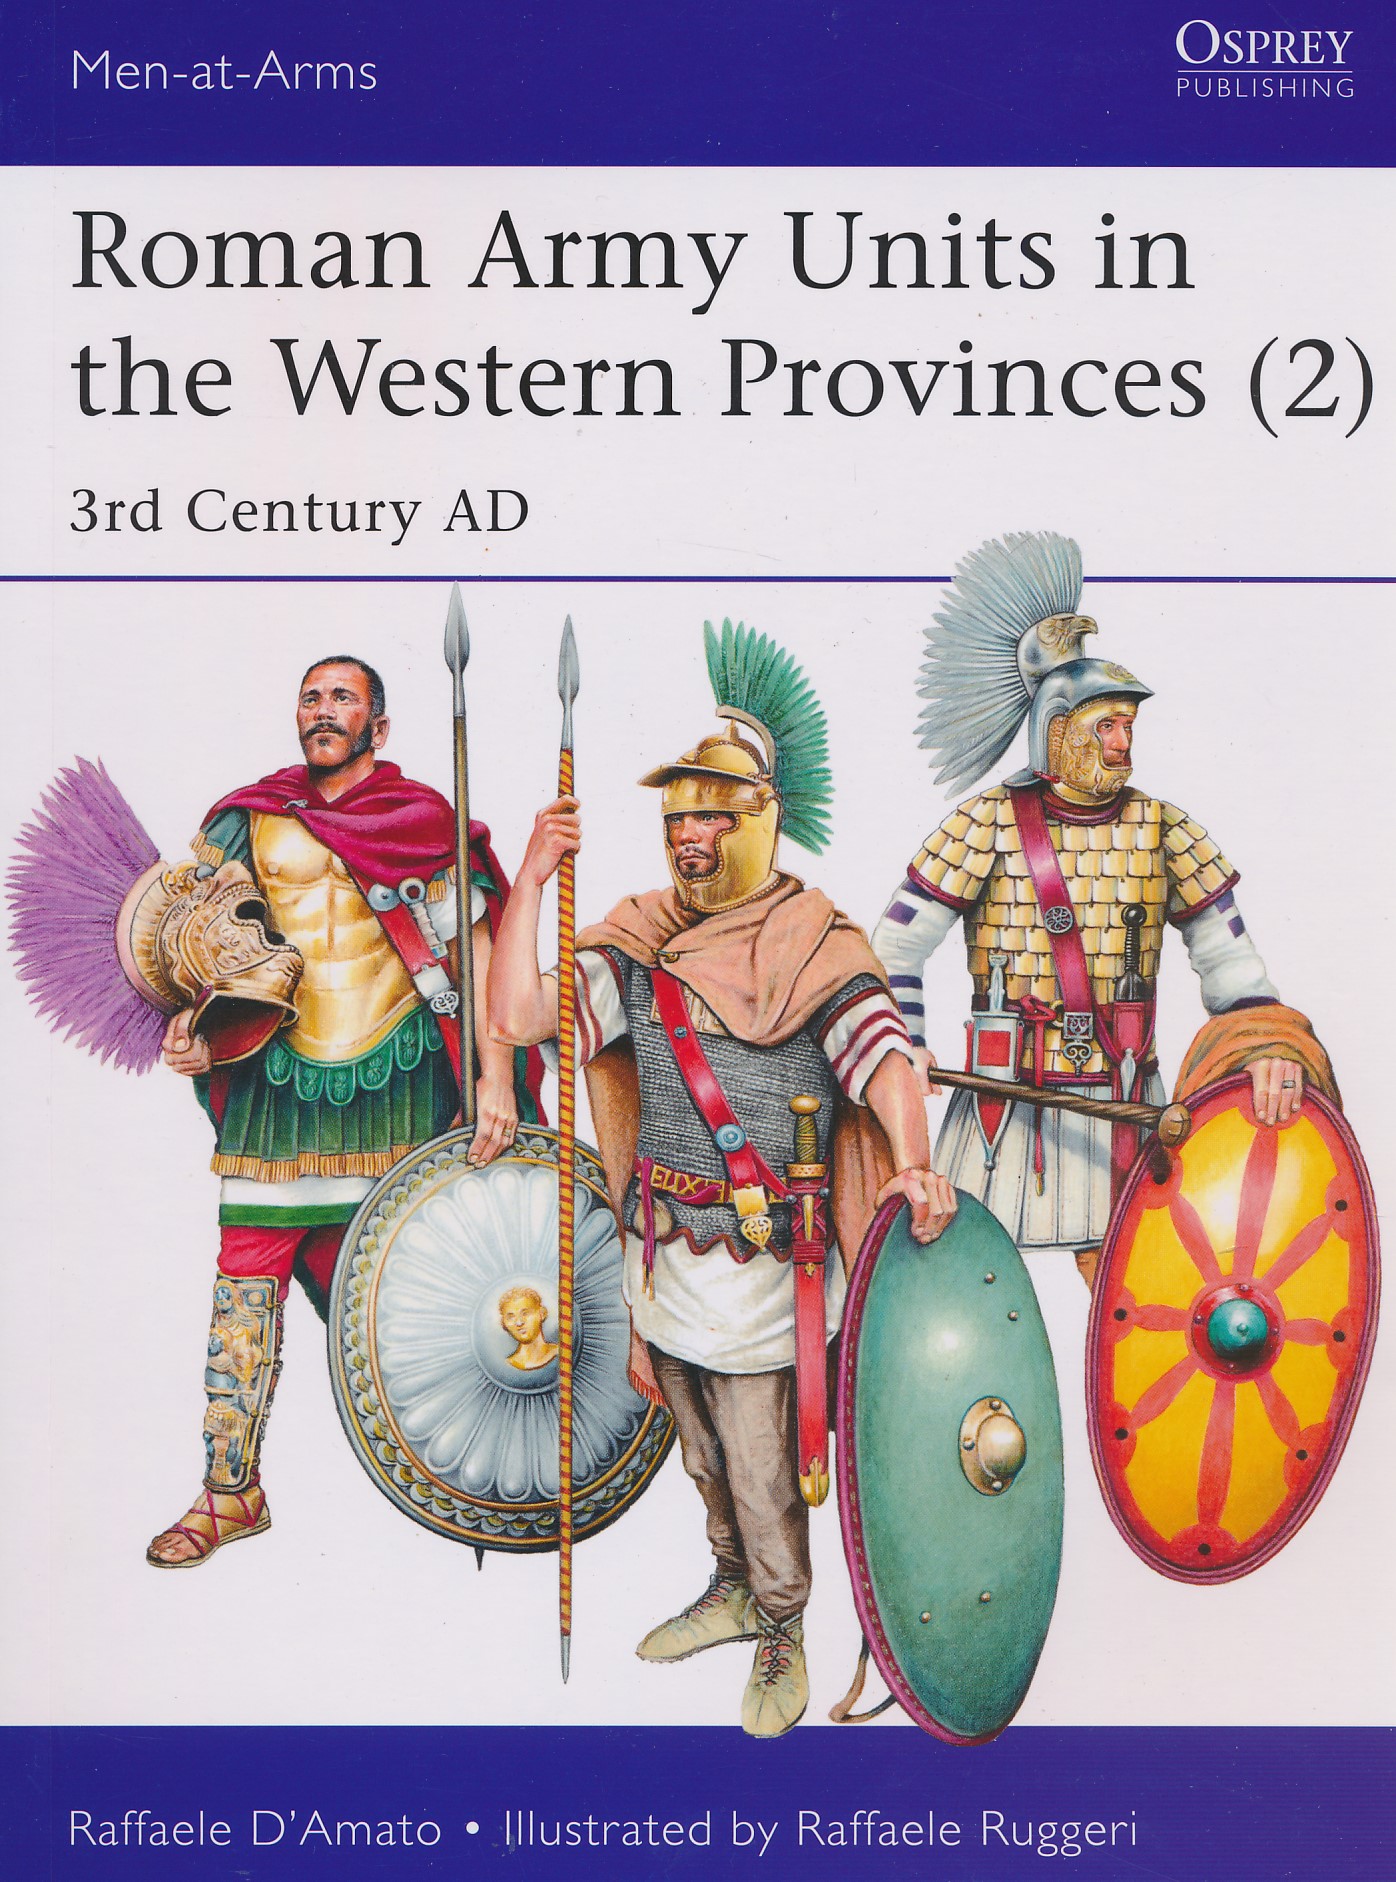 Roman Army Units in the western Provinces (2). Osprey Men-at Arms series 527.